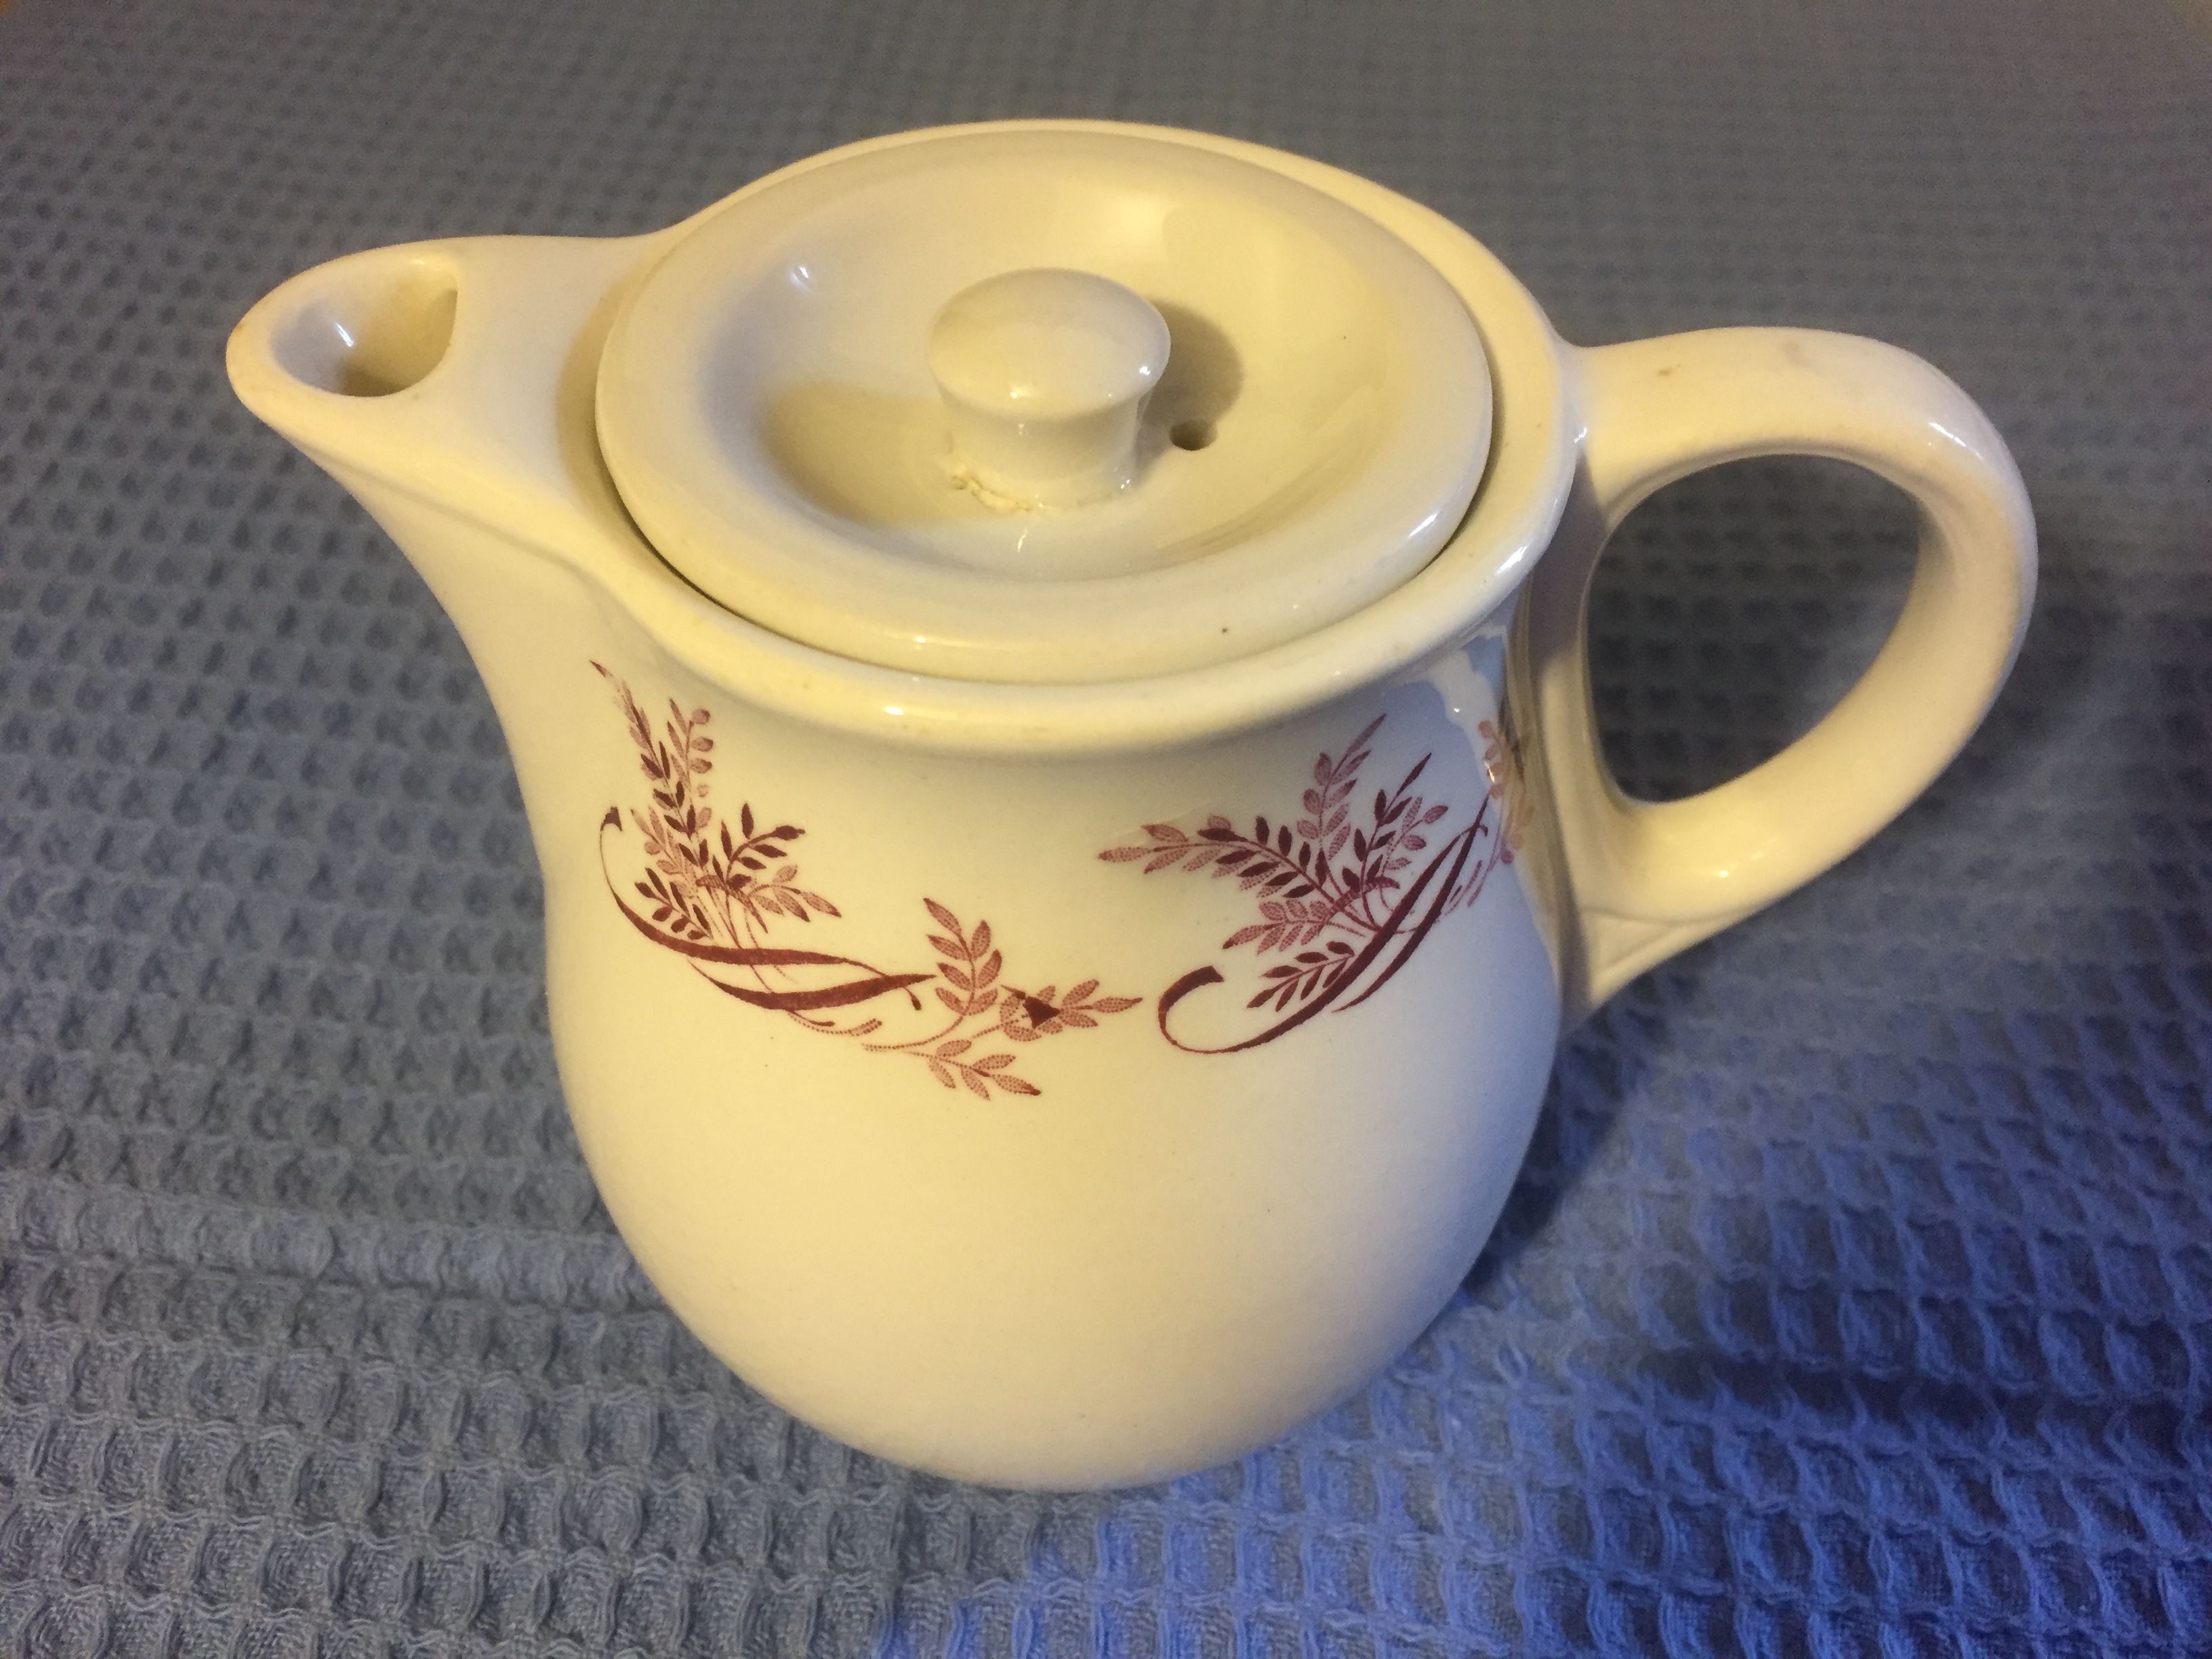 AS USED ON BOARD TEAPOT FROM THE BRITISH & COMMONWEALTH LINE